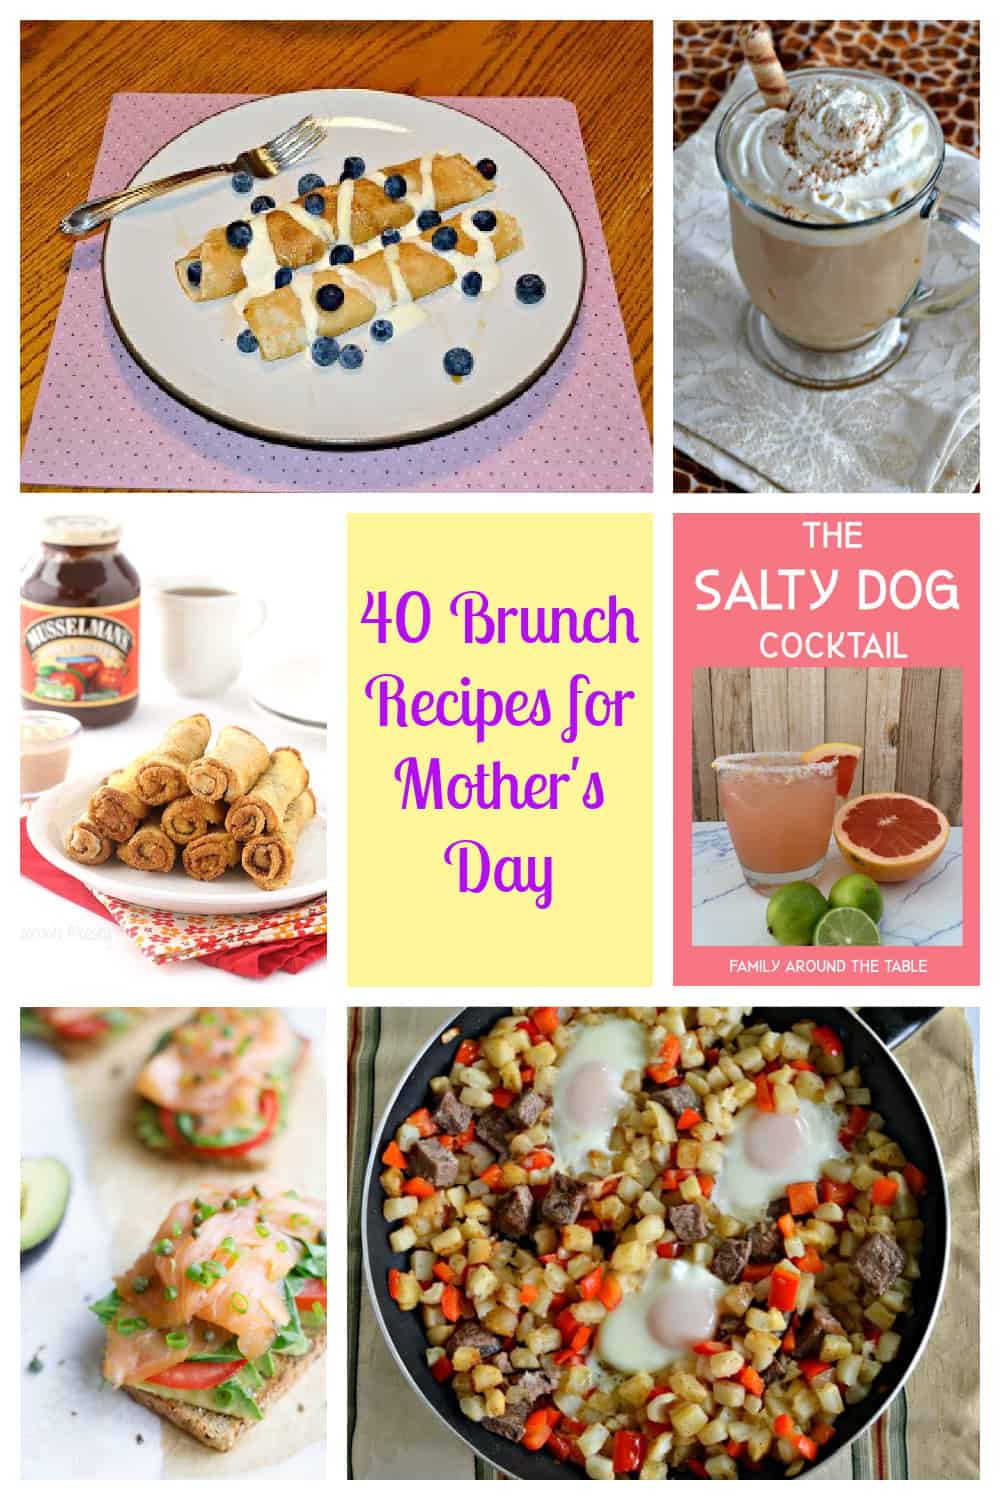 40 Brunch Recipes for Mother’s Day